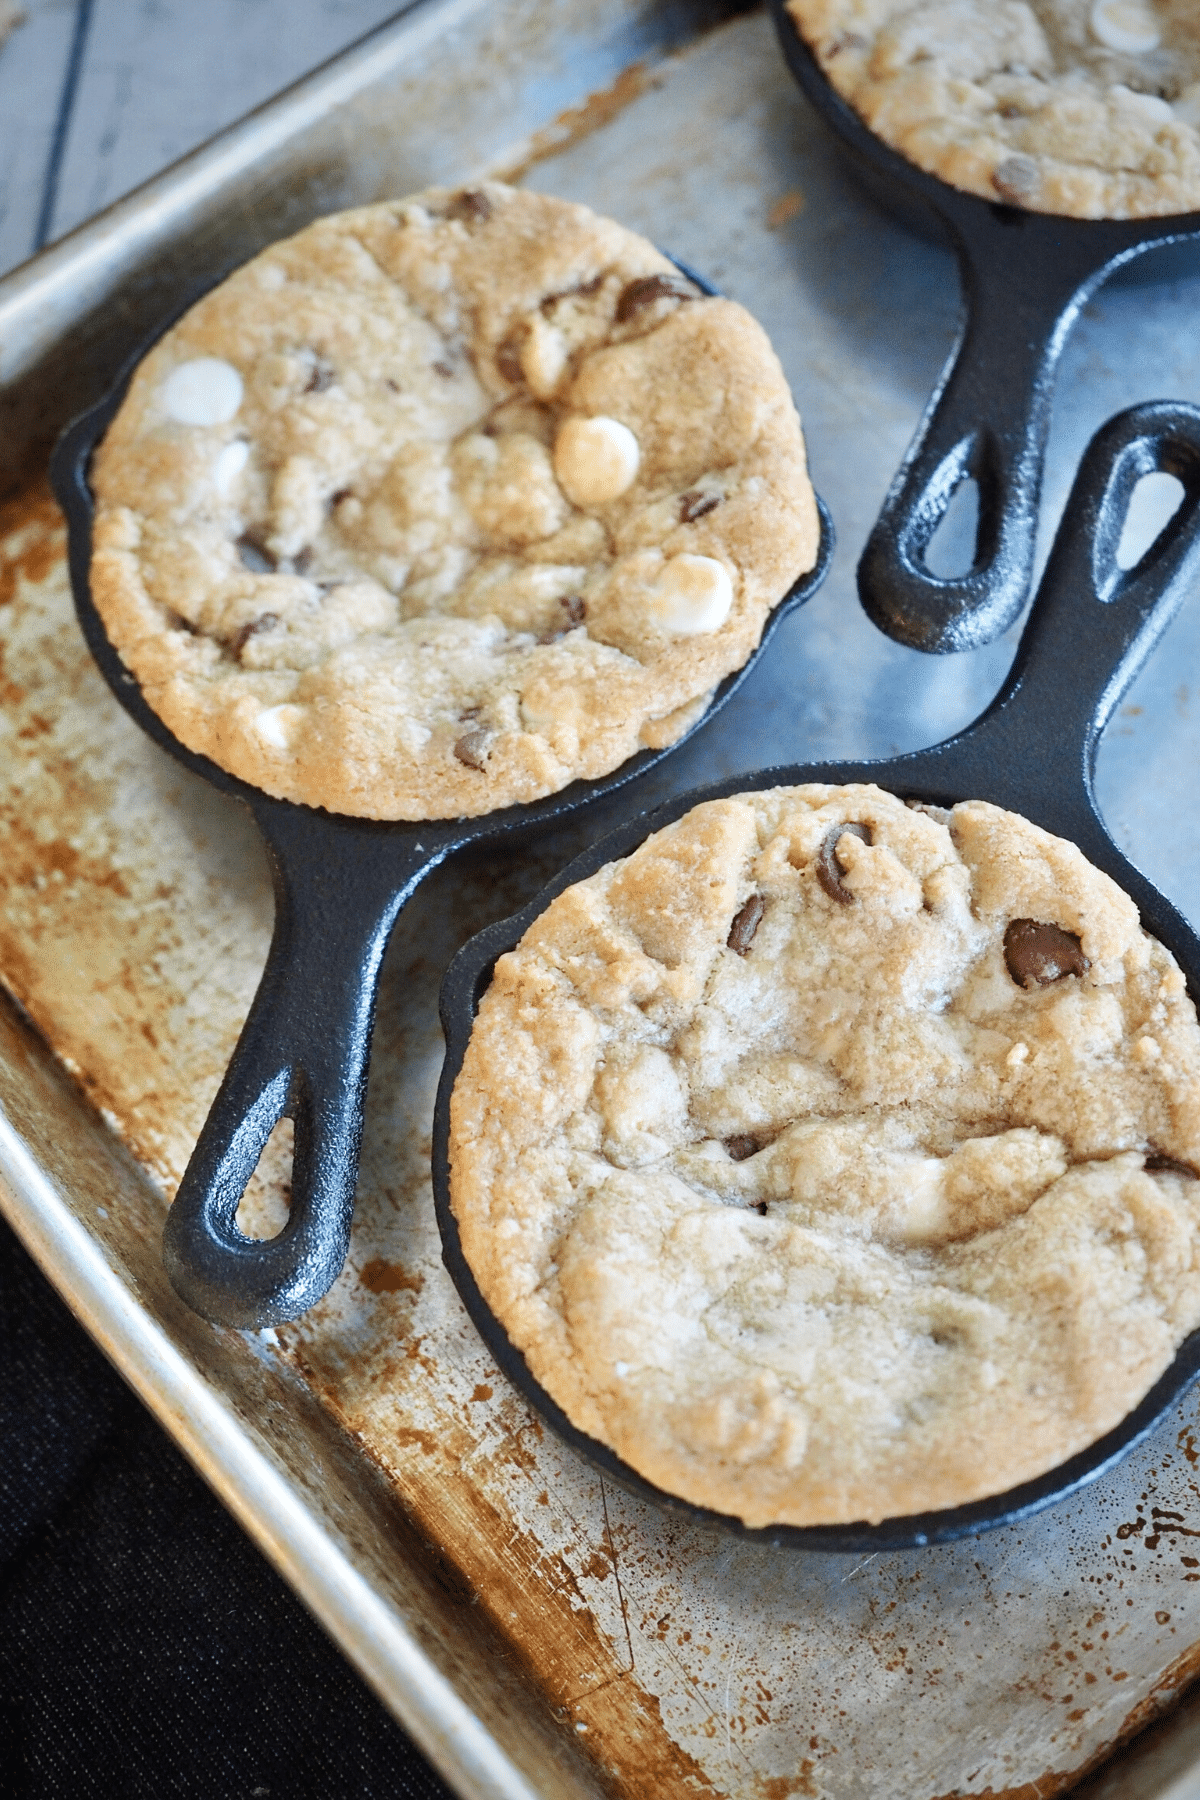 https://www.thefreshcooky.com/wp-content/uploads/2019/05/half-baked-cookies-in-mini-cast-iron-skillets.png